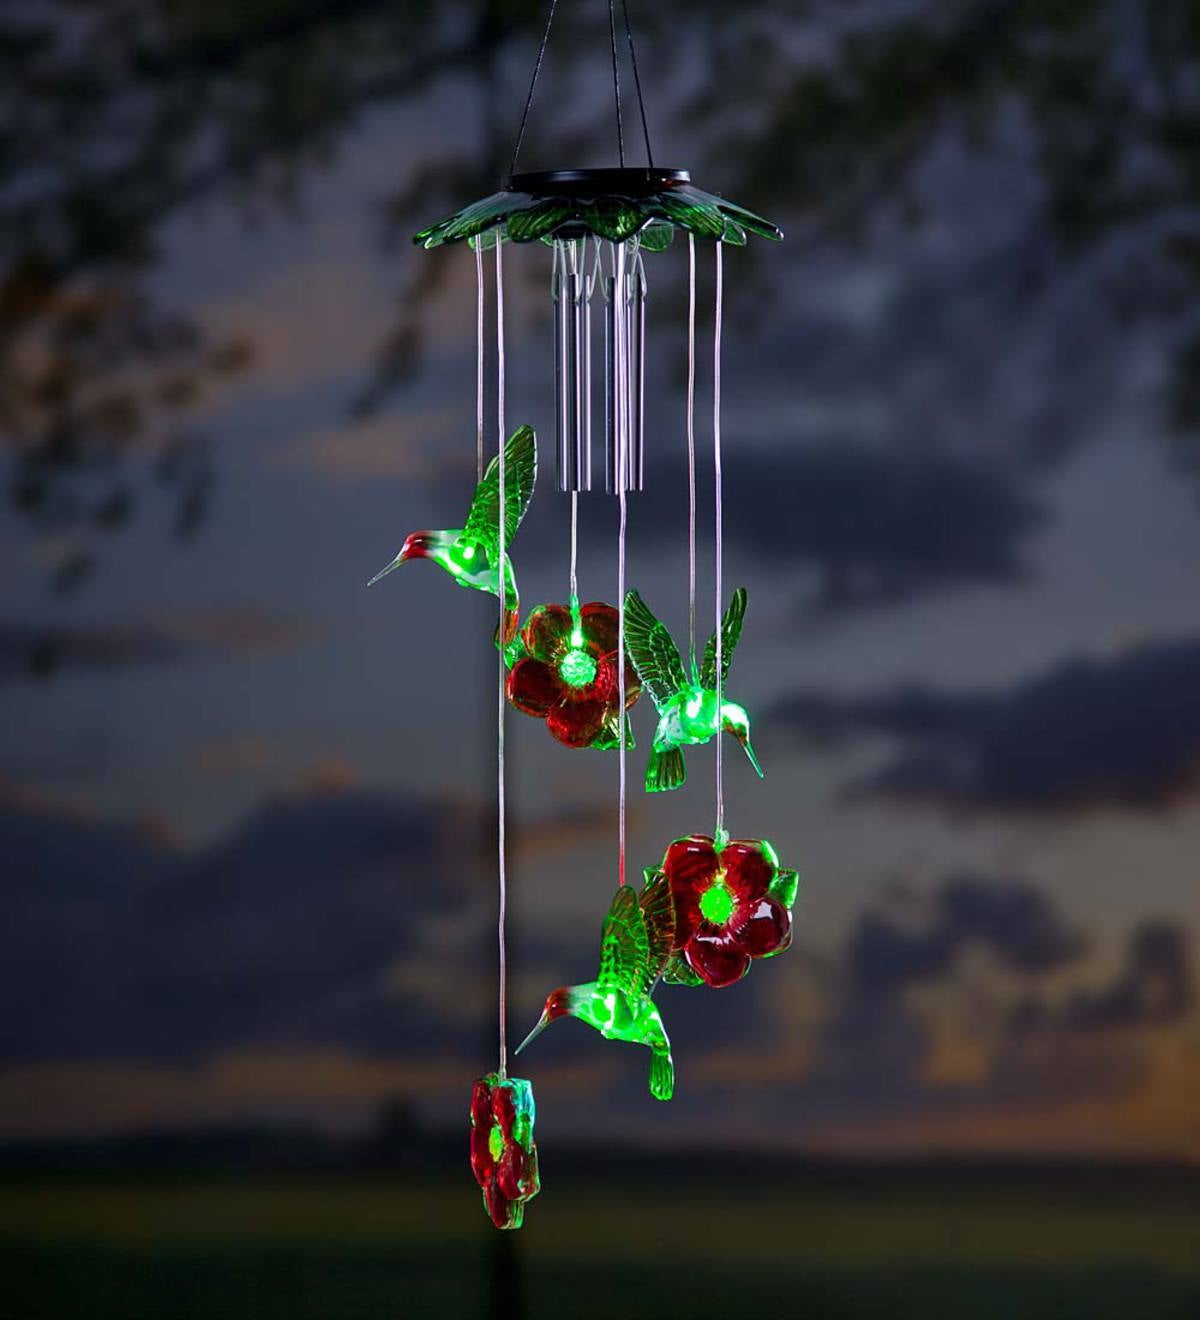 Solar Hummingbirds Mobile with Wind Chime